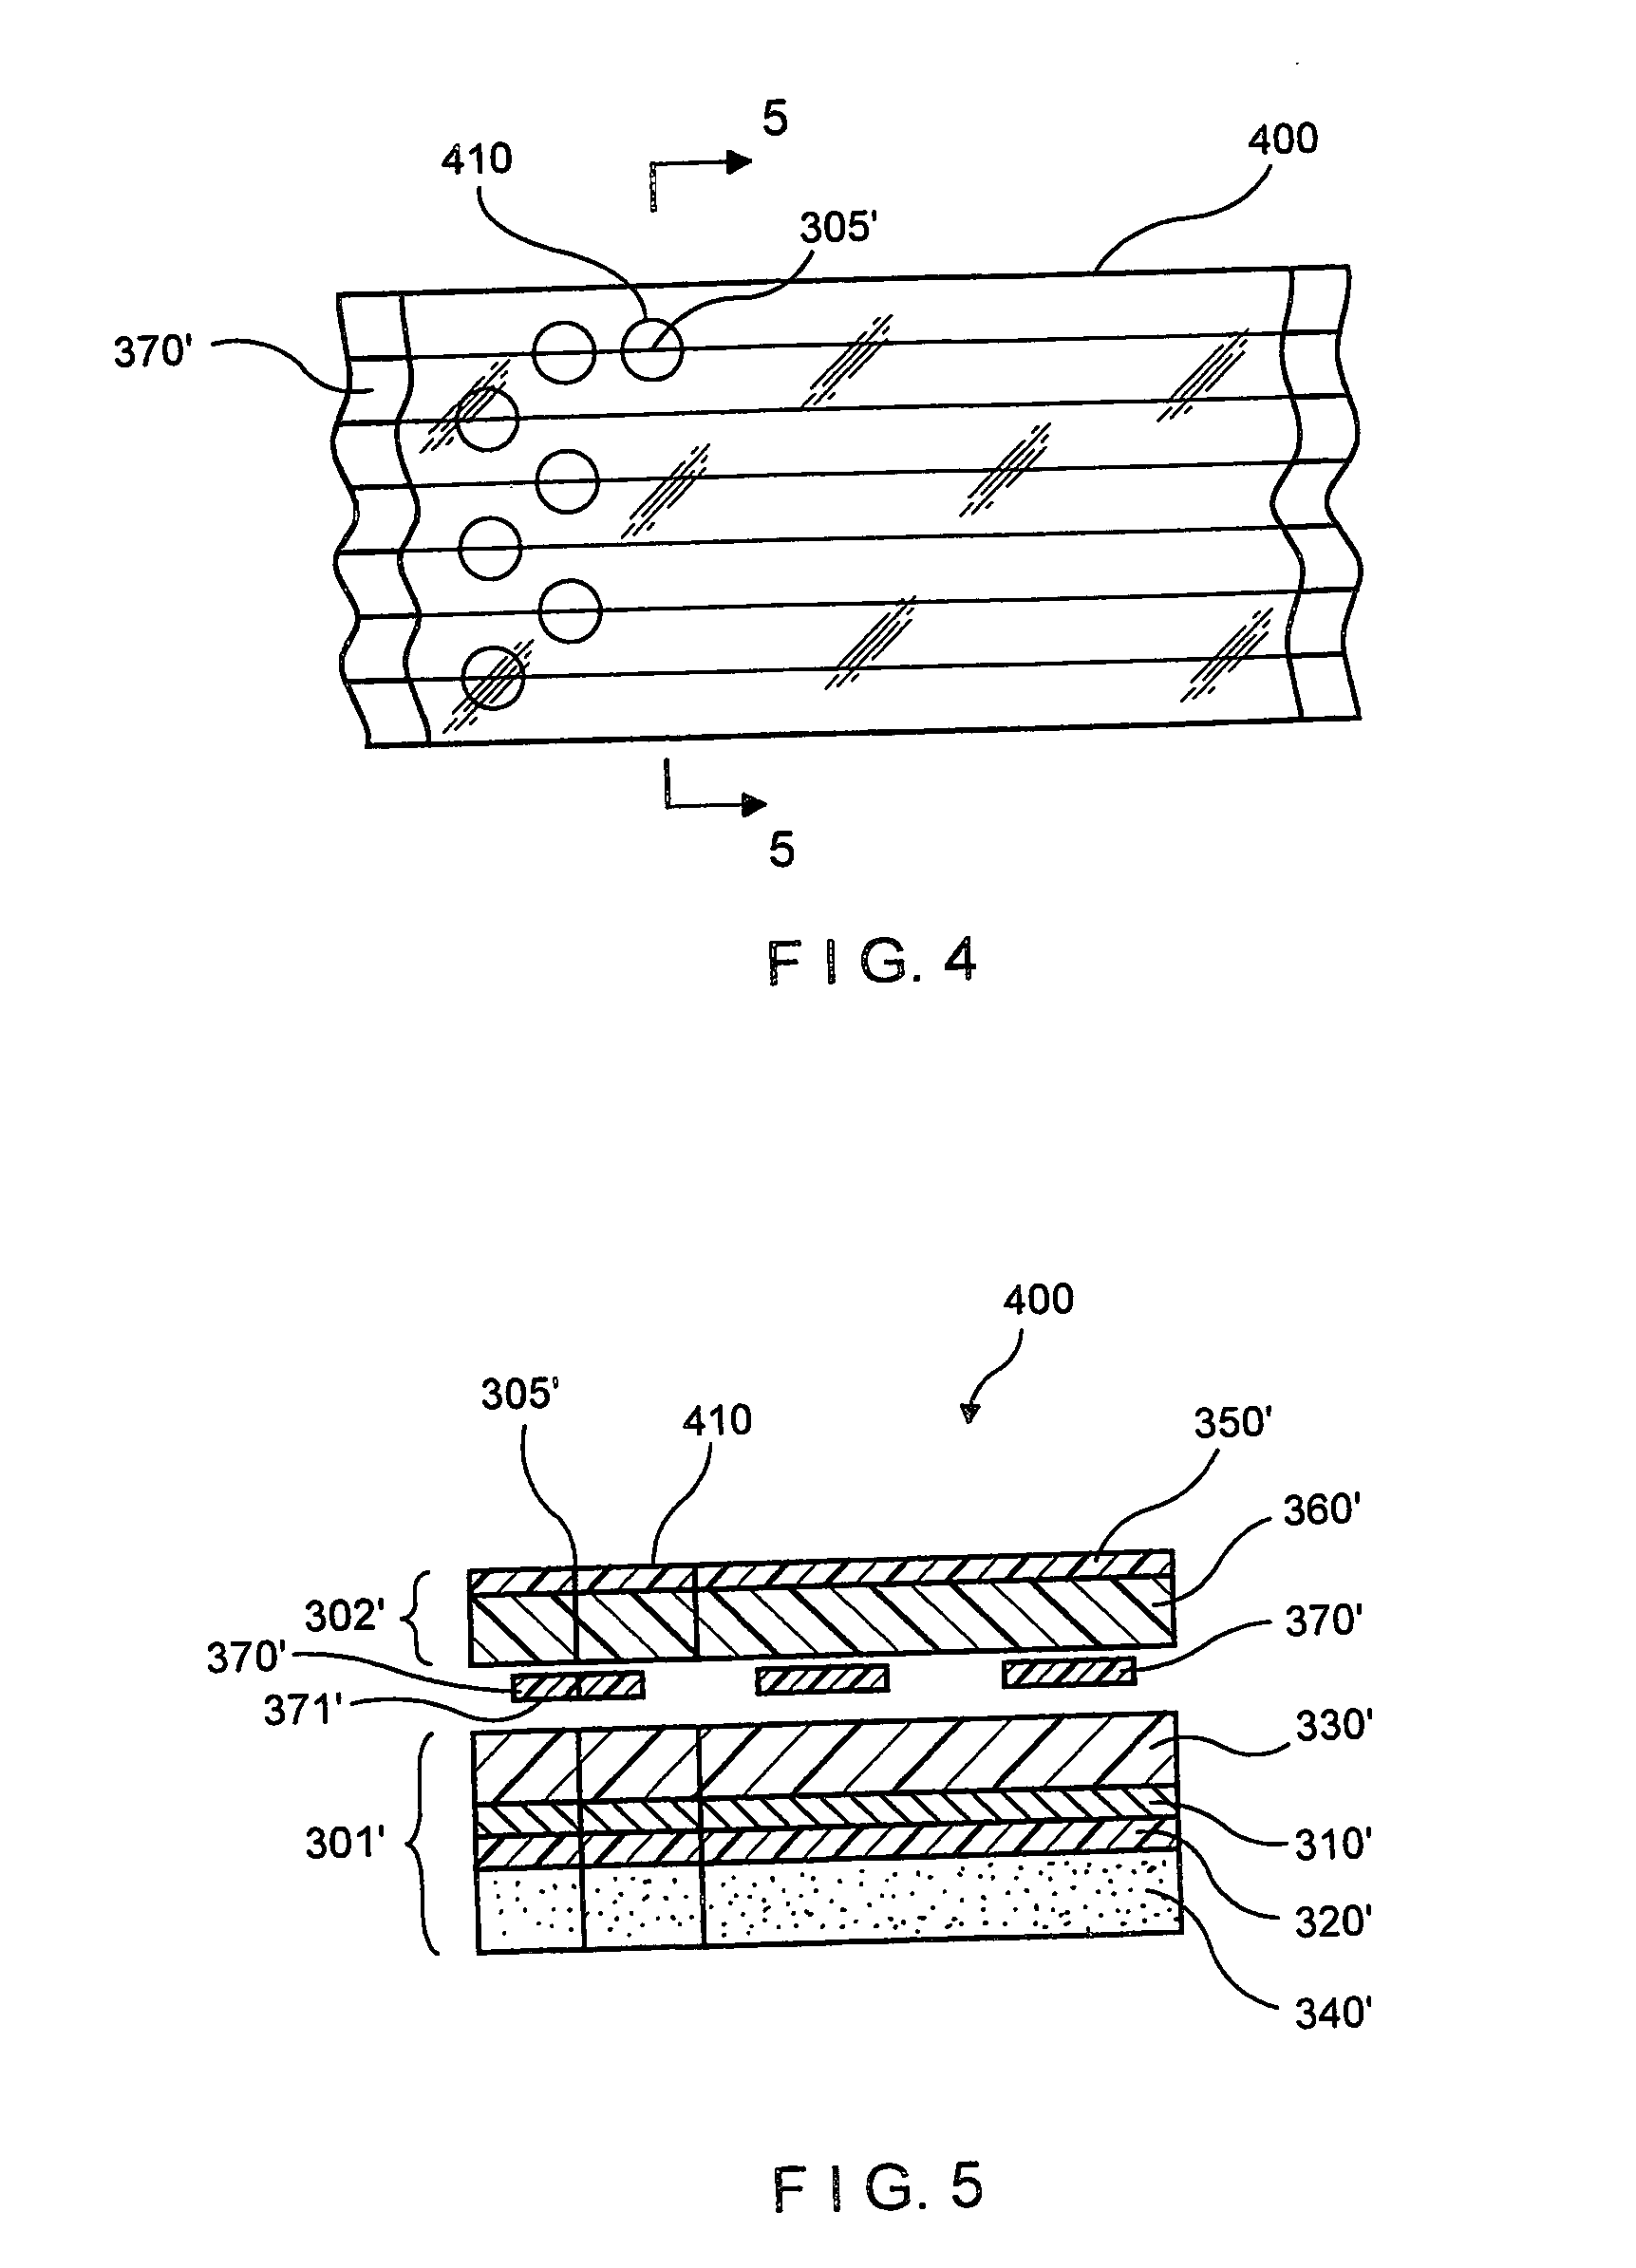 Pull-tab sealing member with improved heat distribution for a container